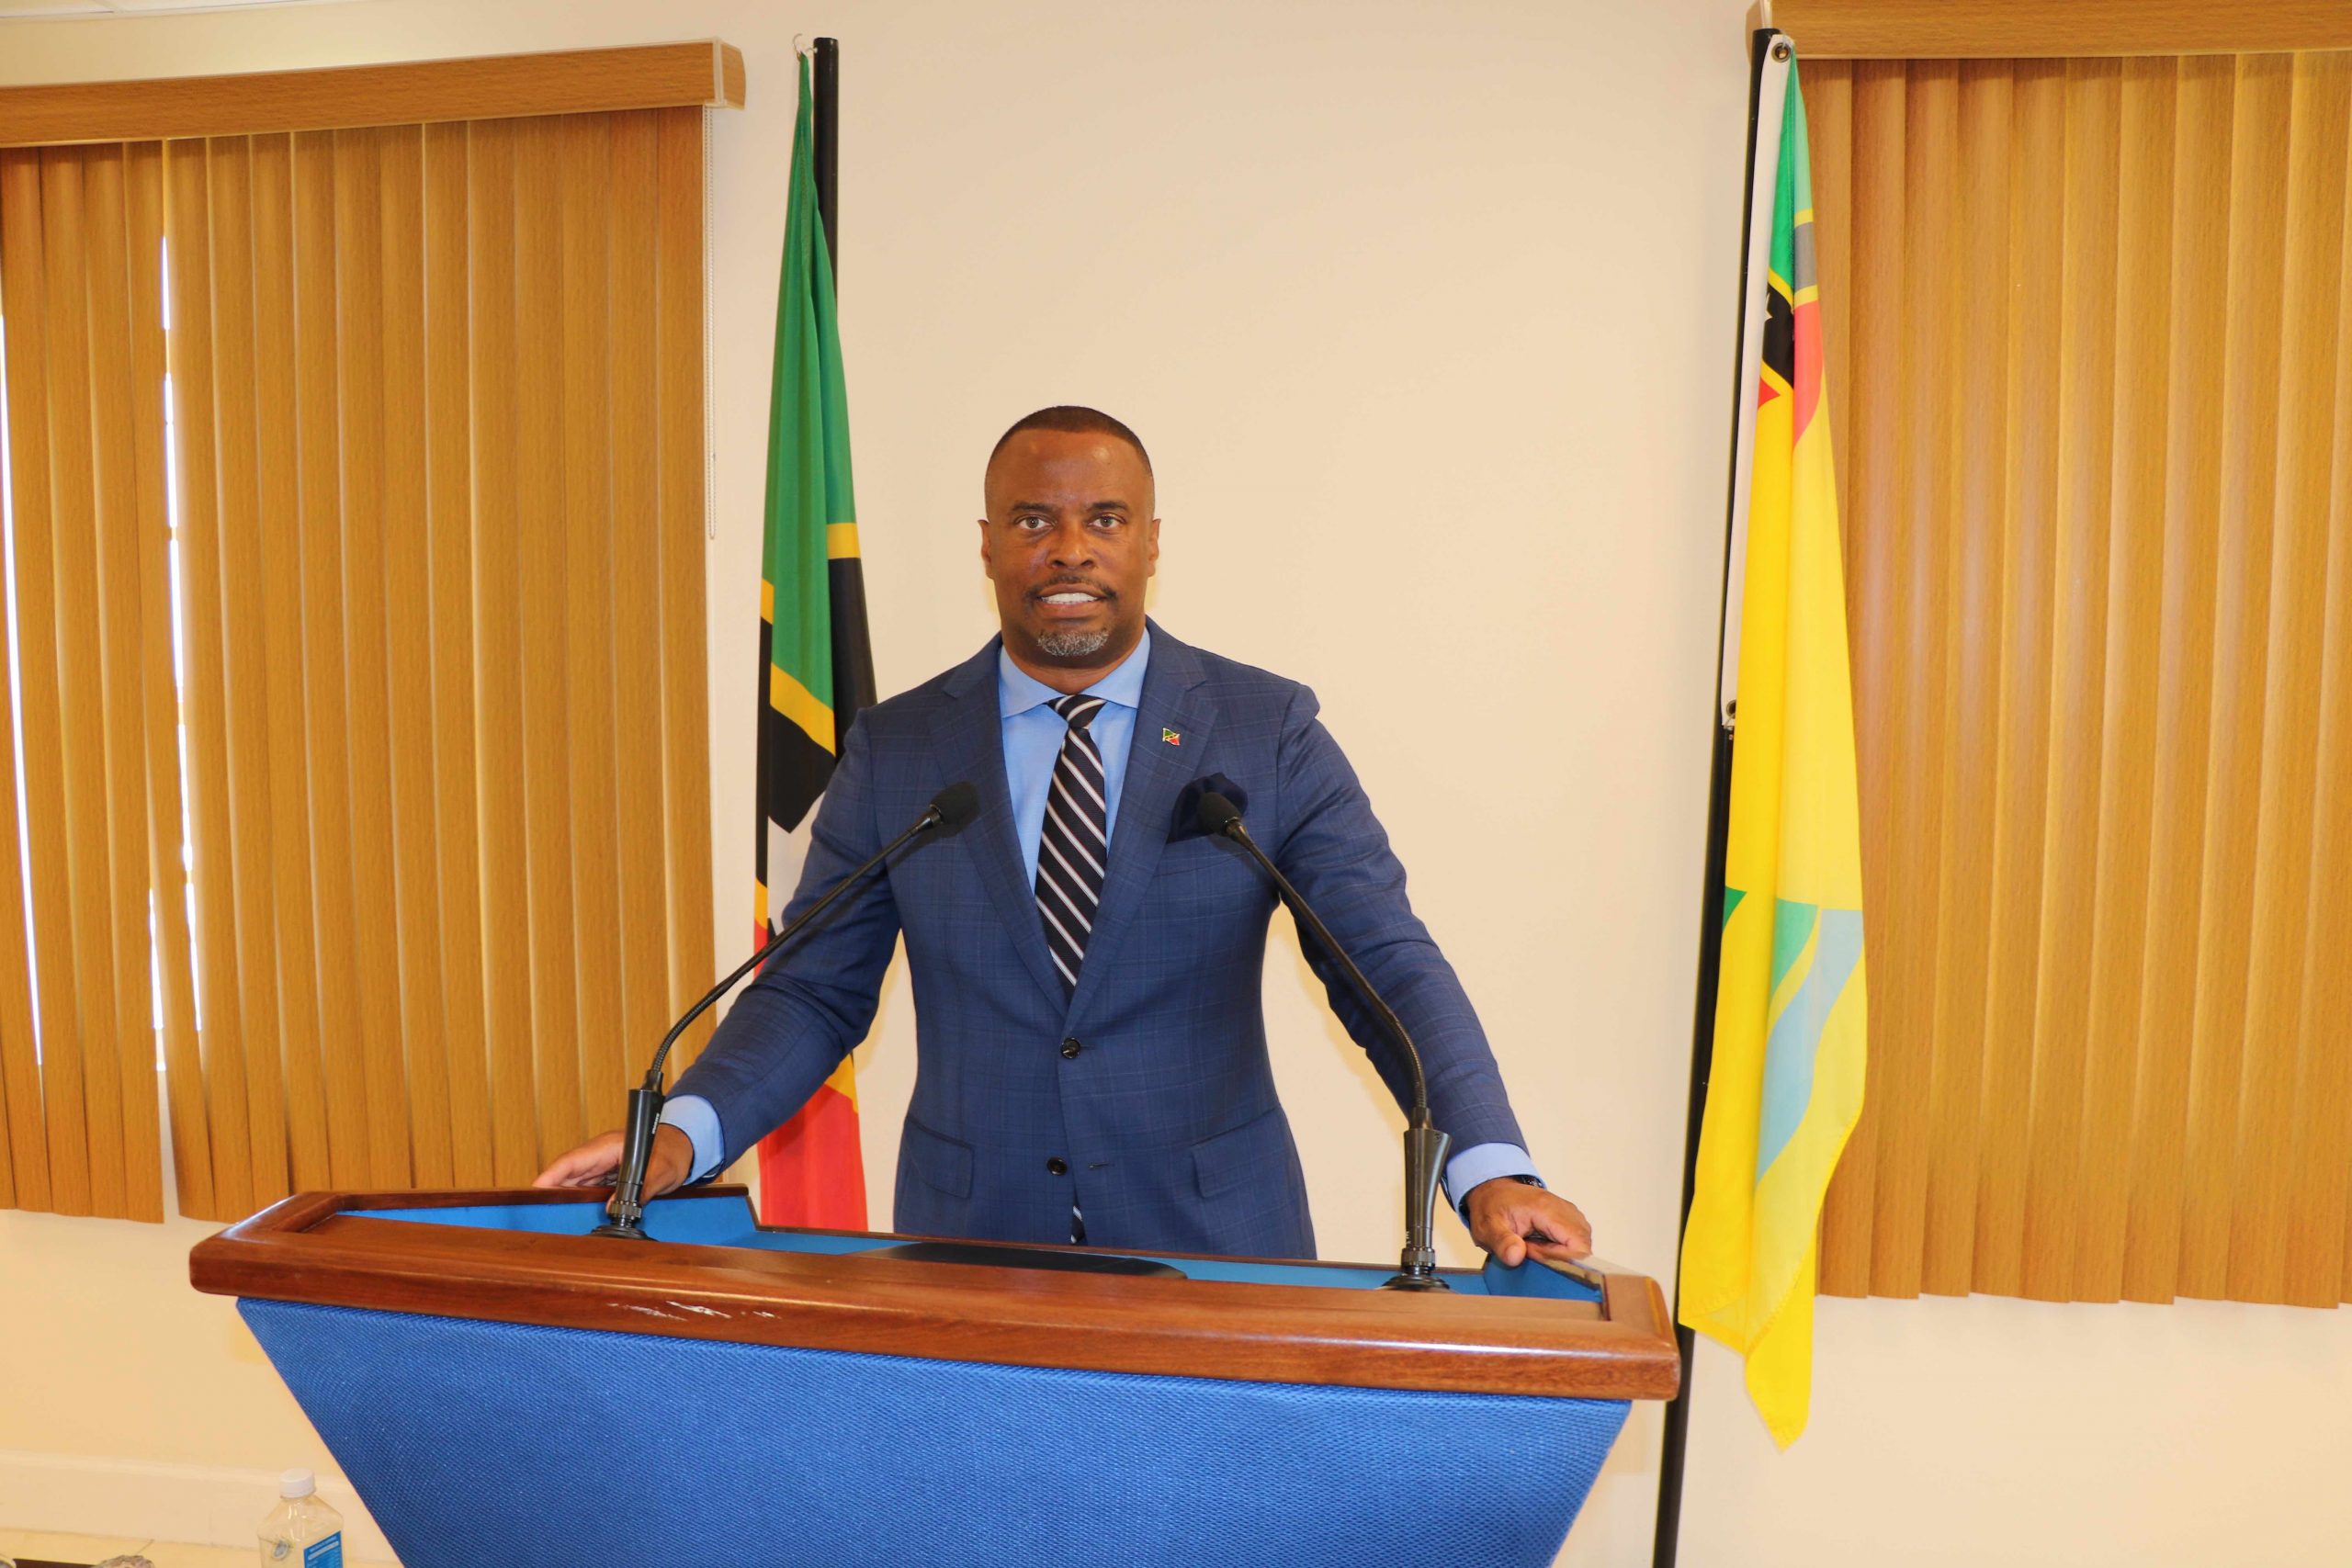 Hon. Mark Brantley, Premier and Minister of Tourism in the Nevis Island Administration